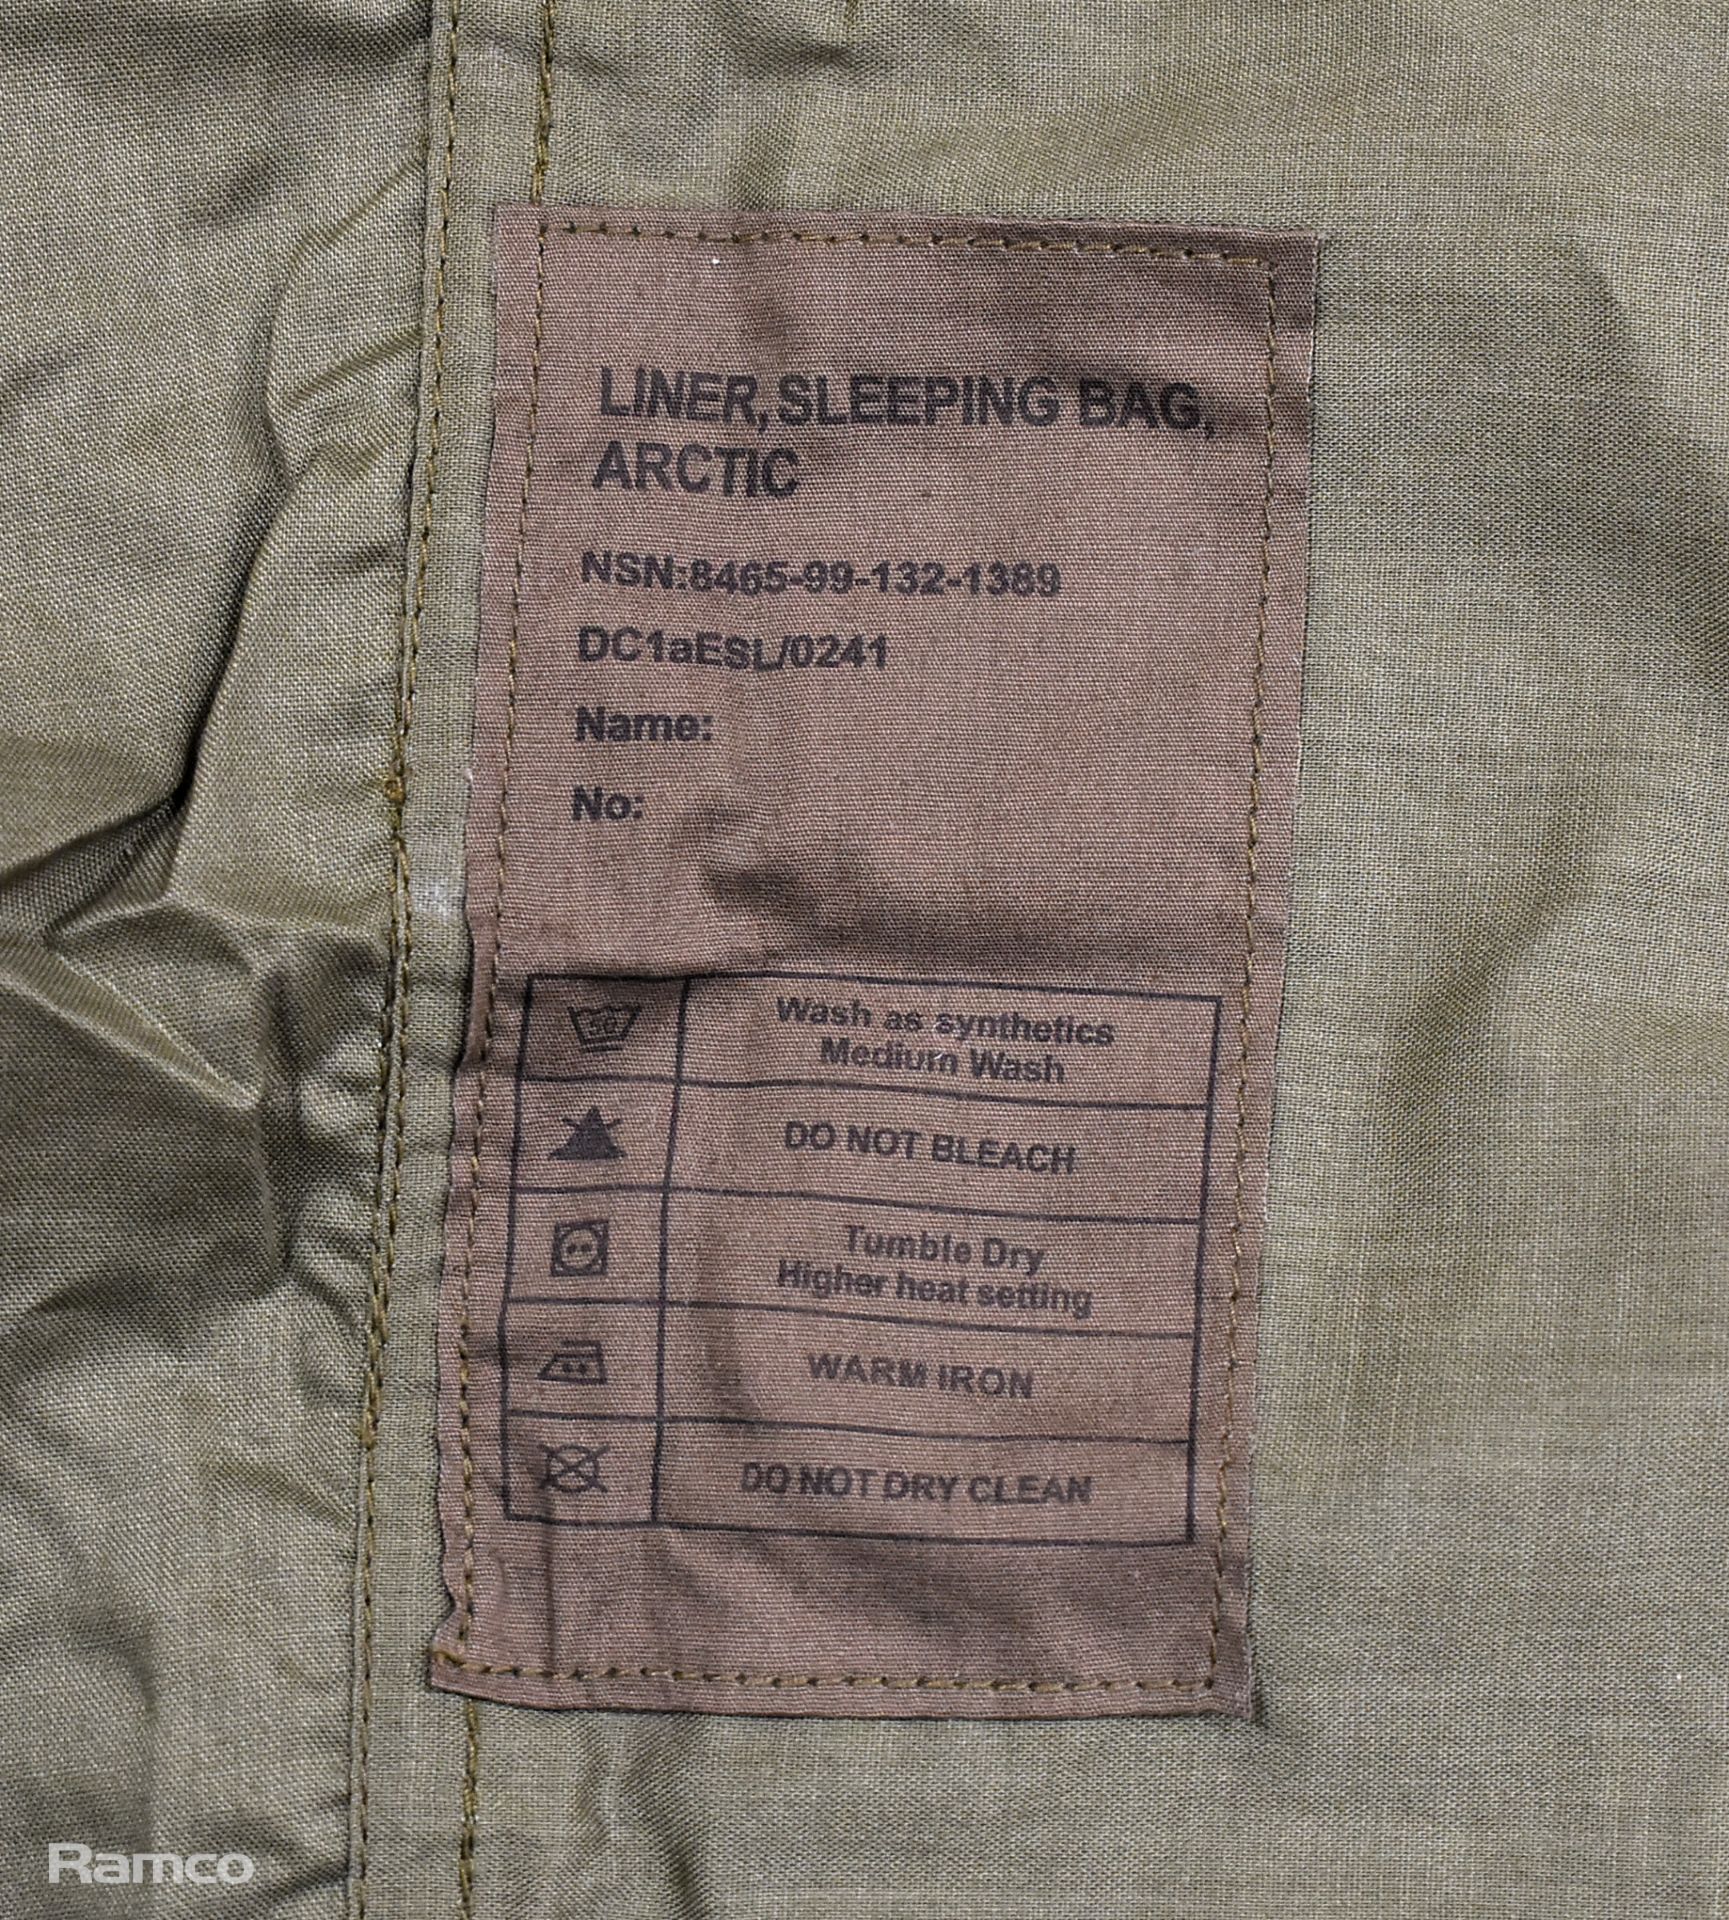 36x British Army sleeping bag light weight liners - large - Olive - mixed grades - Image 4 of 7